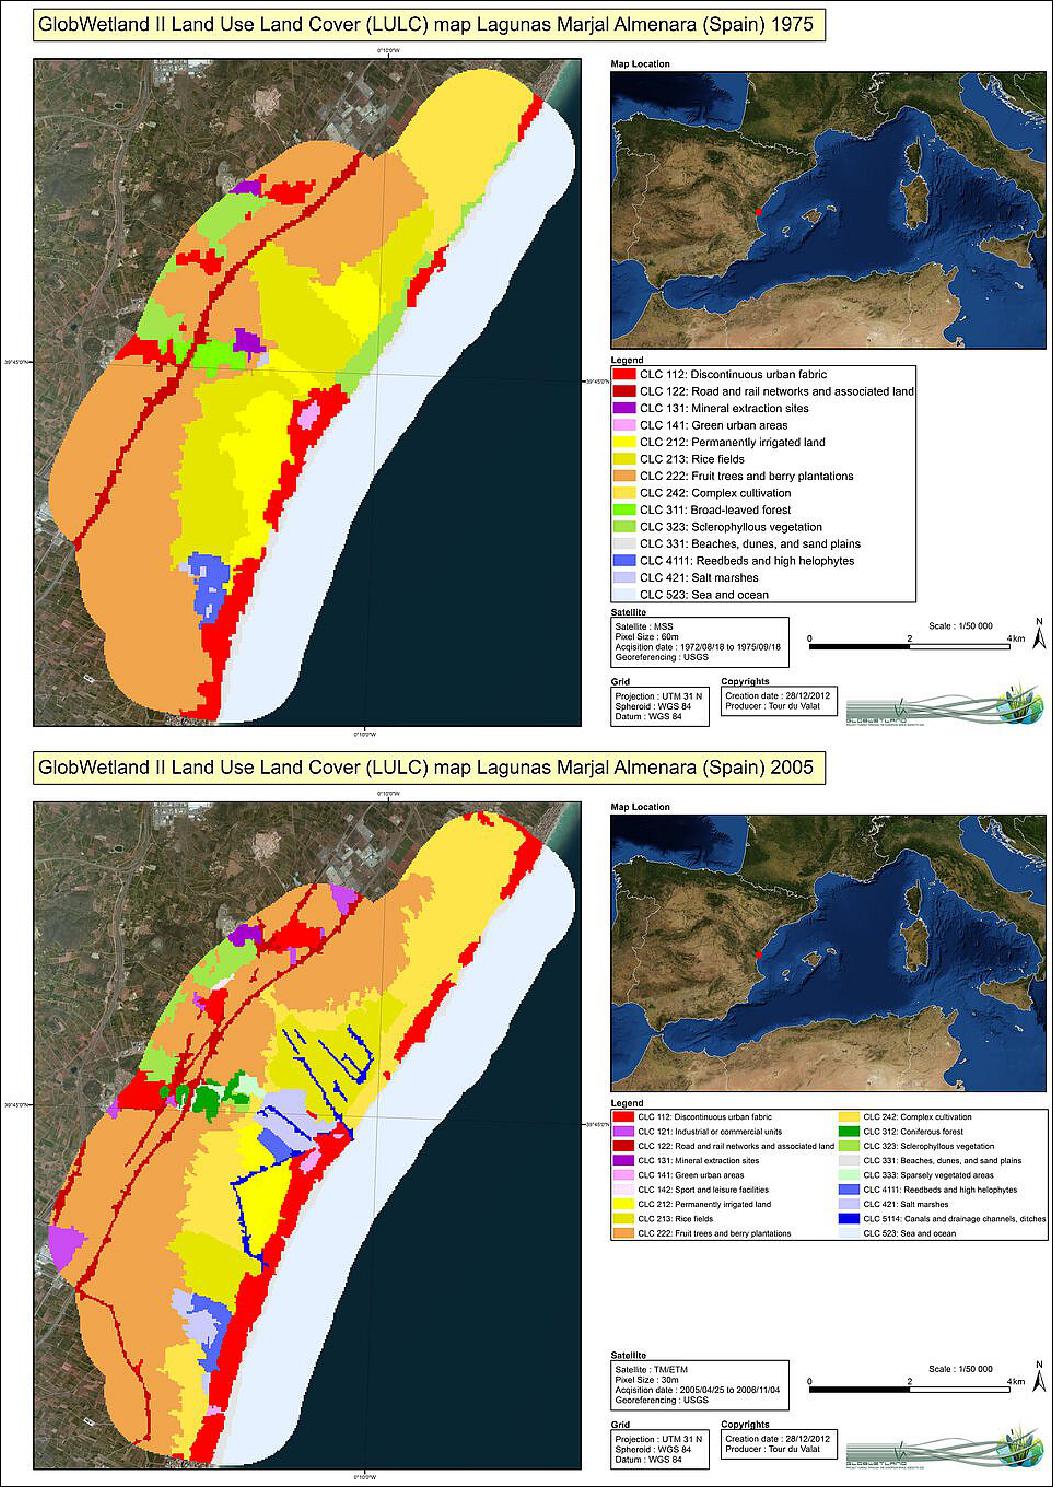 Figure 11: Wetland changes in Spain. Marjales de Almenara is a wetland located near the city of Almenara in Castellón, Spain. The natural wetland habitats are mainly marshes with aquatic vegetation and reed beds, and the artificial ones are rice fields. As shown on the maps, there have been many changes between 1975 and 2005 in terms of land use and habitat conversions. After the restoration of a part of the cultivated land in the middle of the area (dry crops and rice fields in 1975), new marshes have emerged through a system of canals that provides fresh water and keeps this area permanently flooded (image credit: MWO / ESA / GlobWetland II project team)